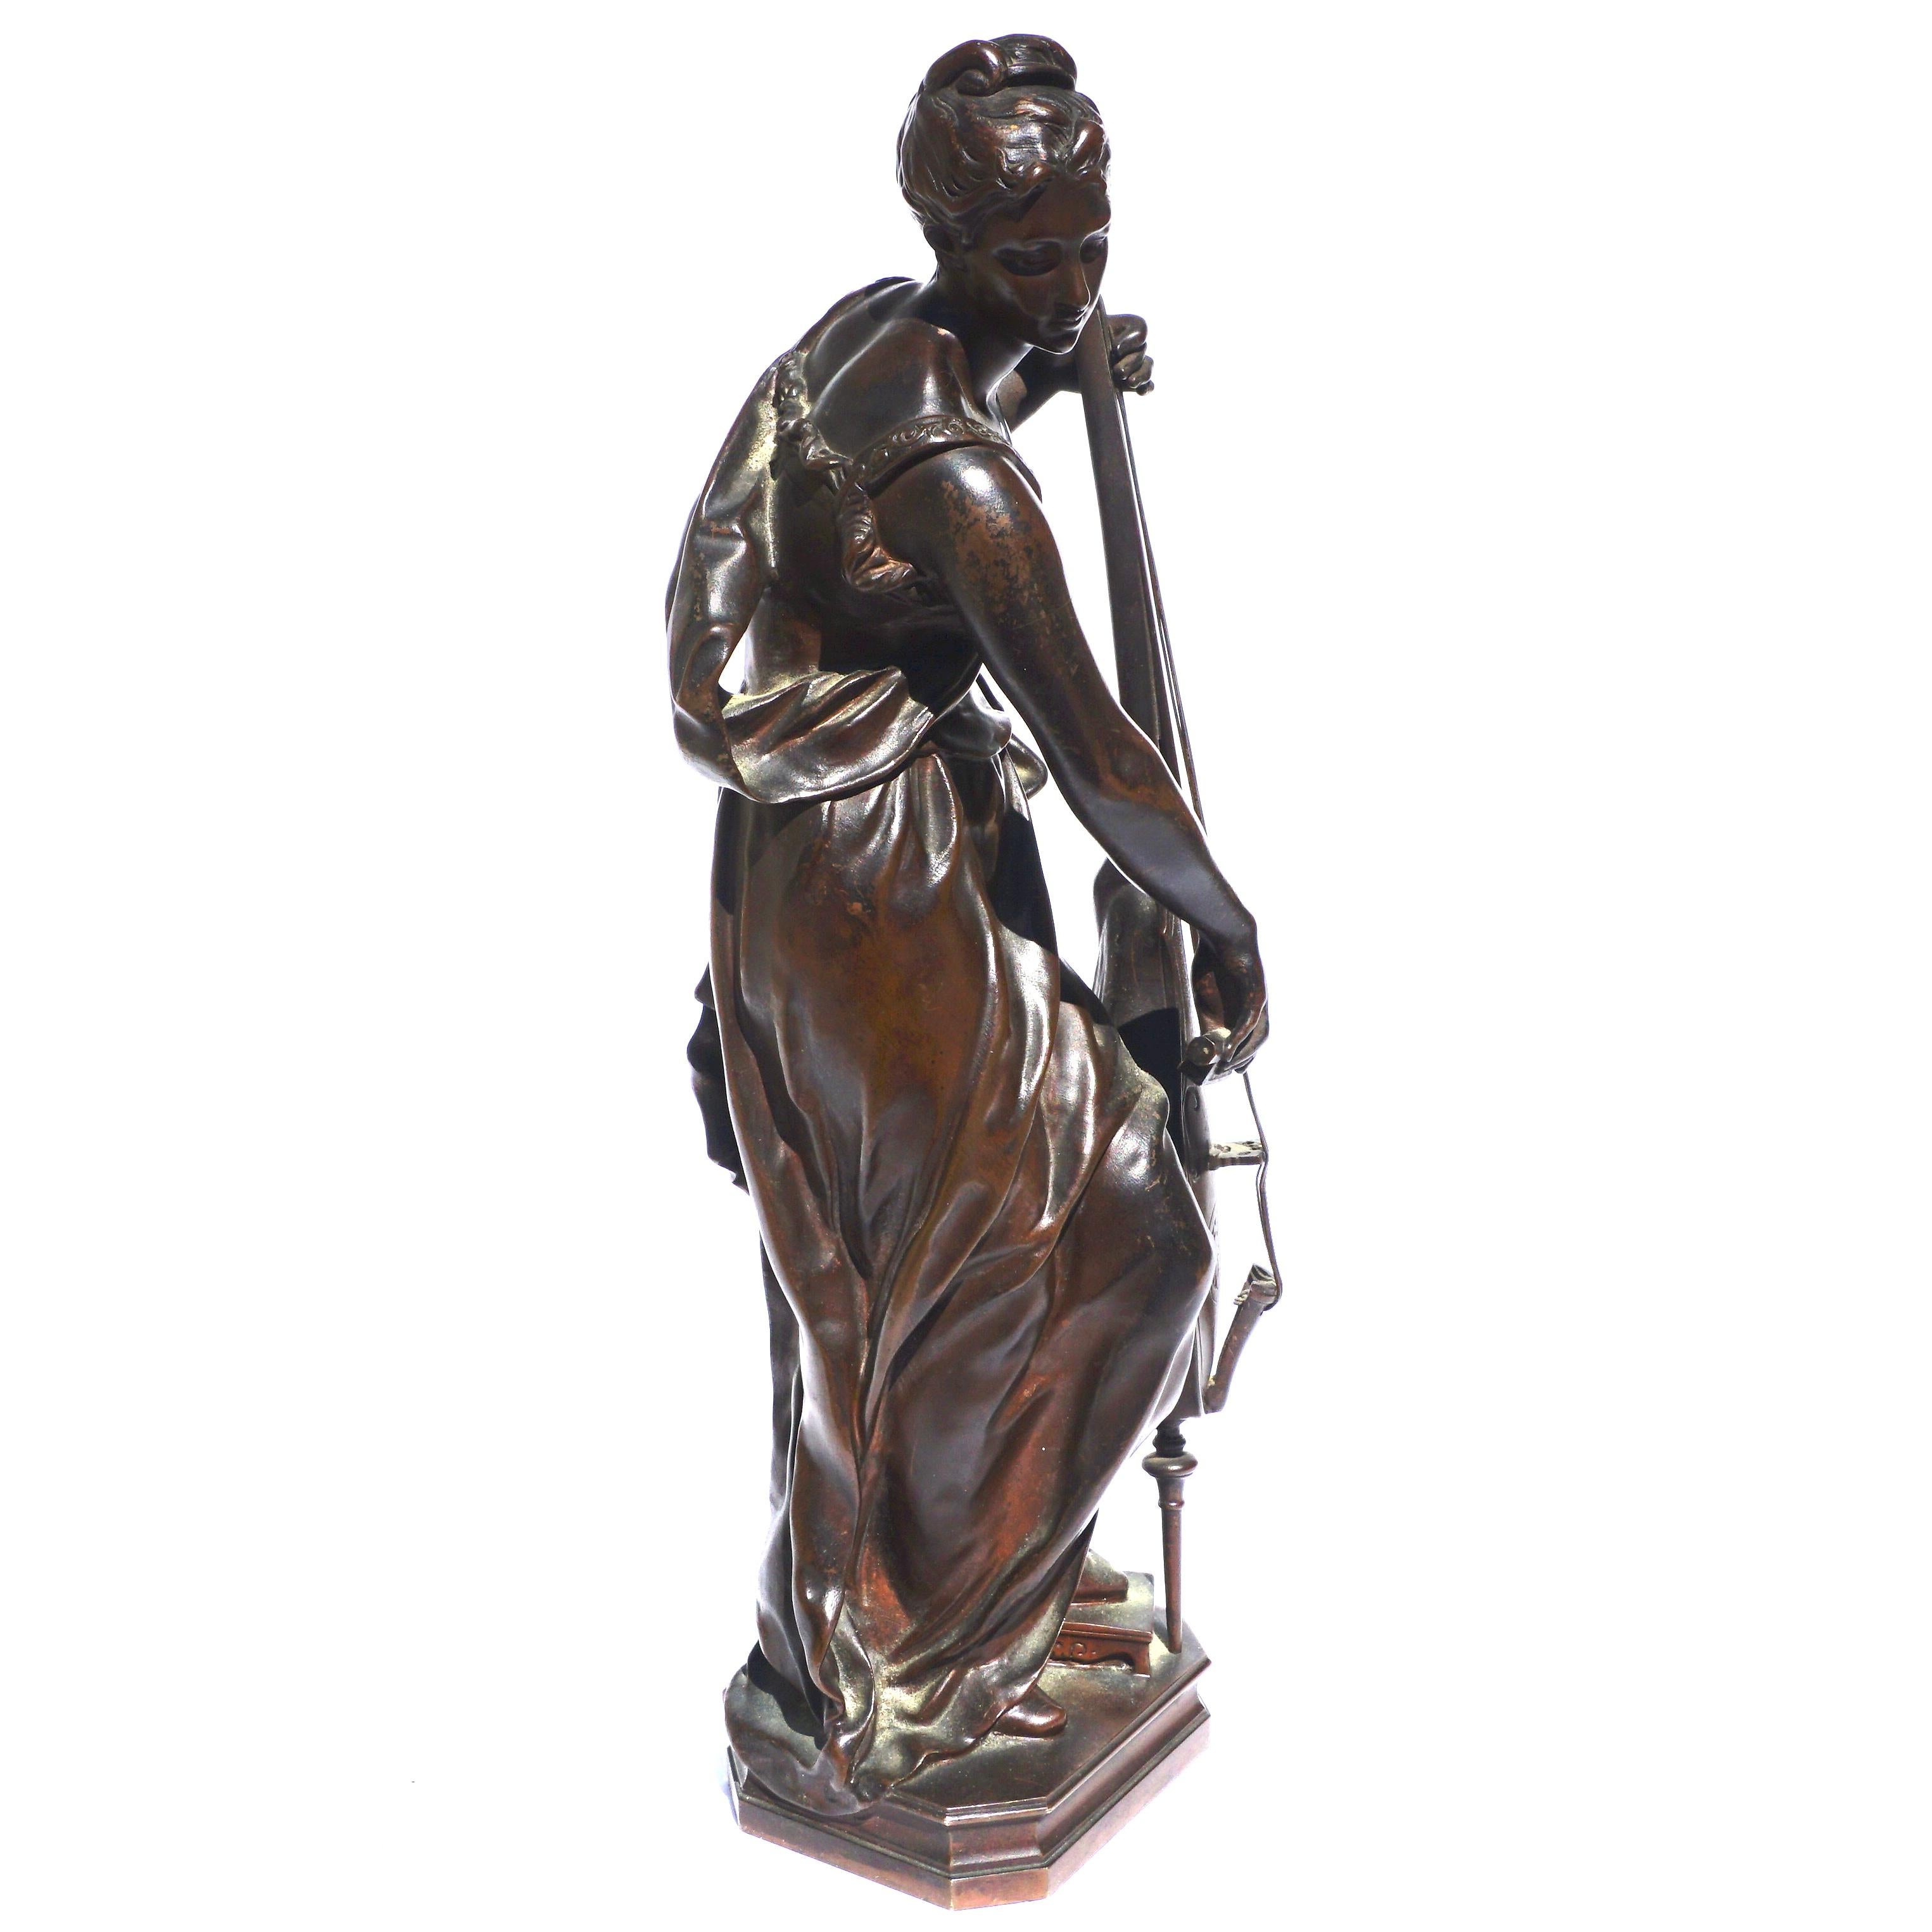 A French bronze figure of a girl playing a cello. Very rare as I have only seen one sold at Christies. Beautiful rich brown patina with amazing chiseling and detail throughout. Unfortunately; her bow has been lost through the ages. A rare and